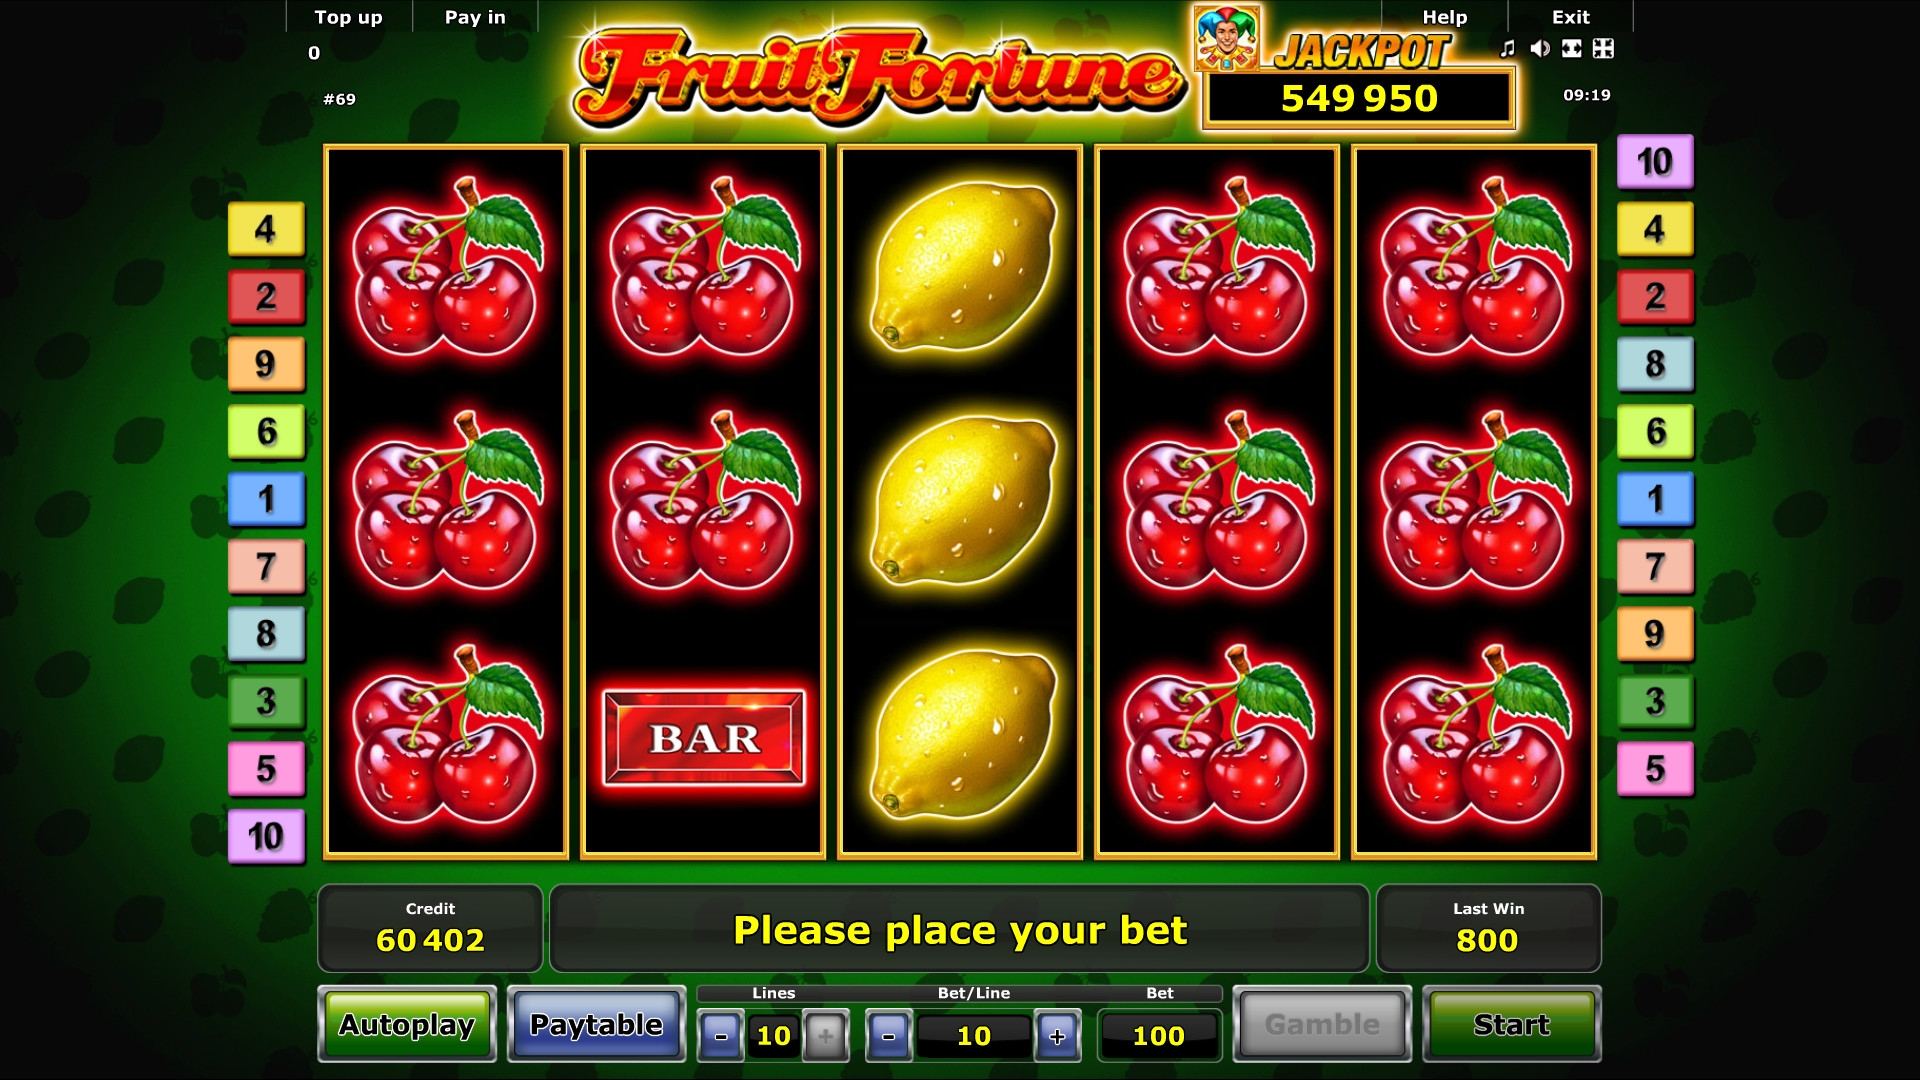 Fruit Fortune (Fruit Fortune) from category Slots